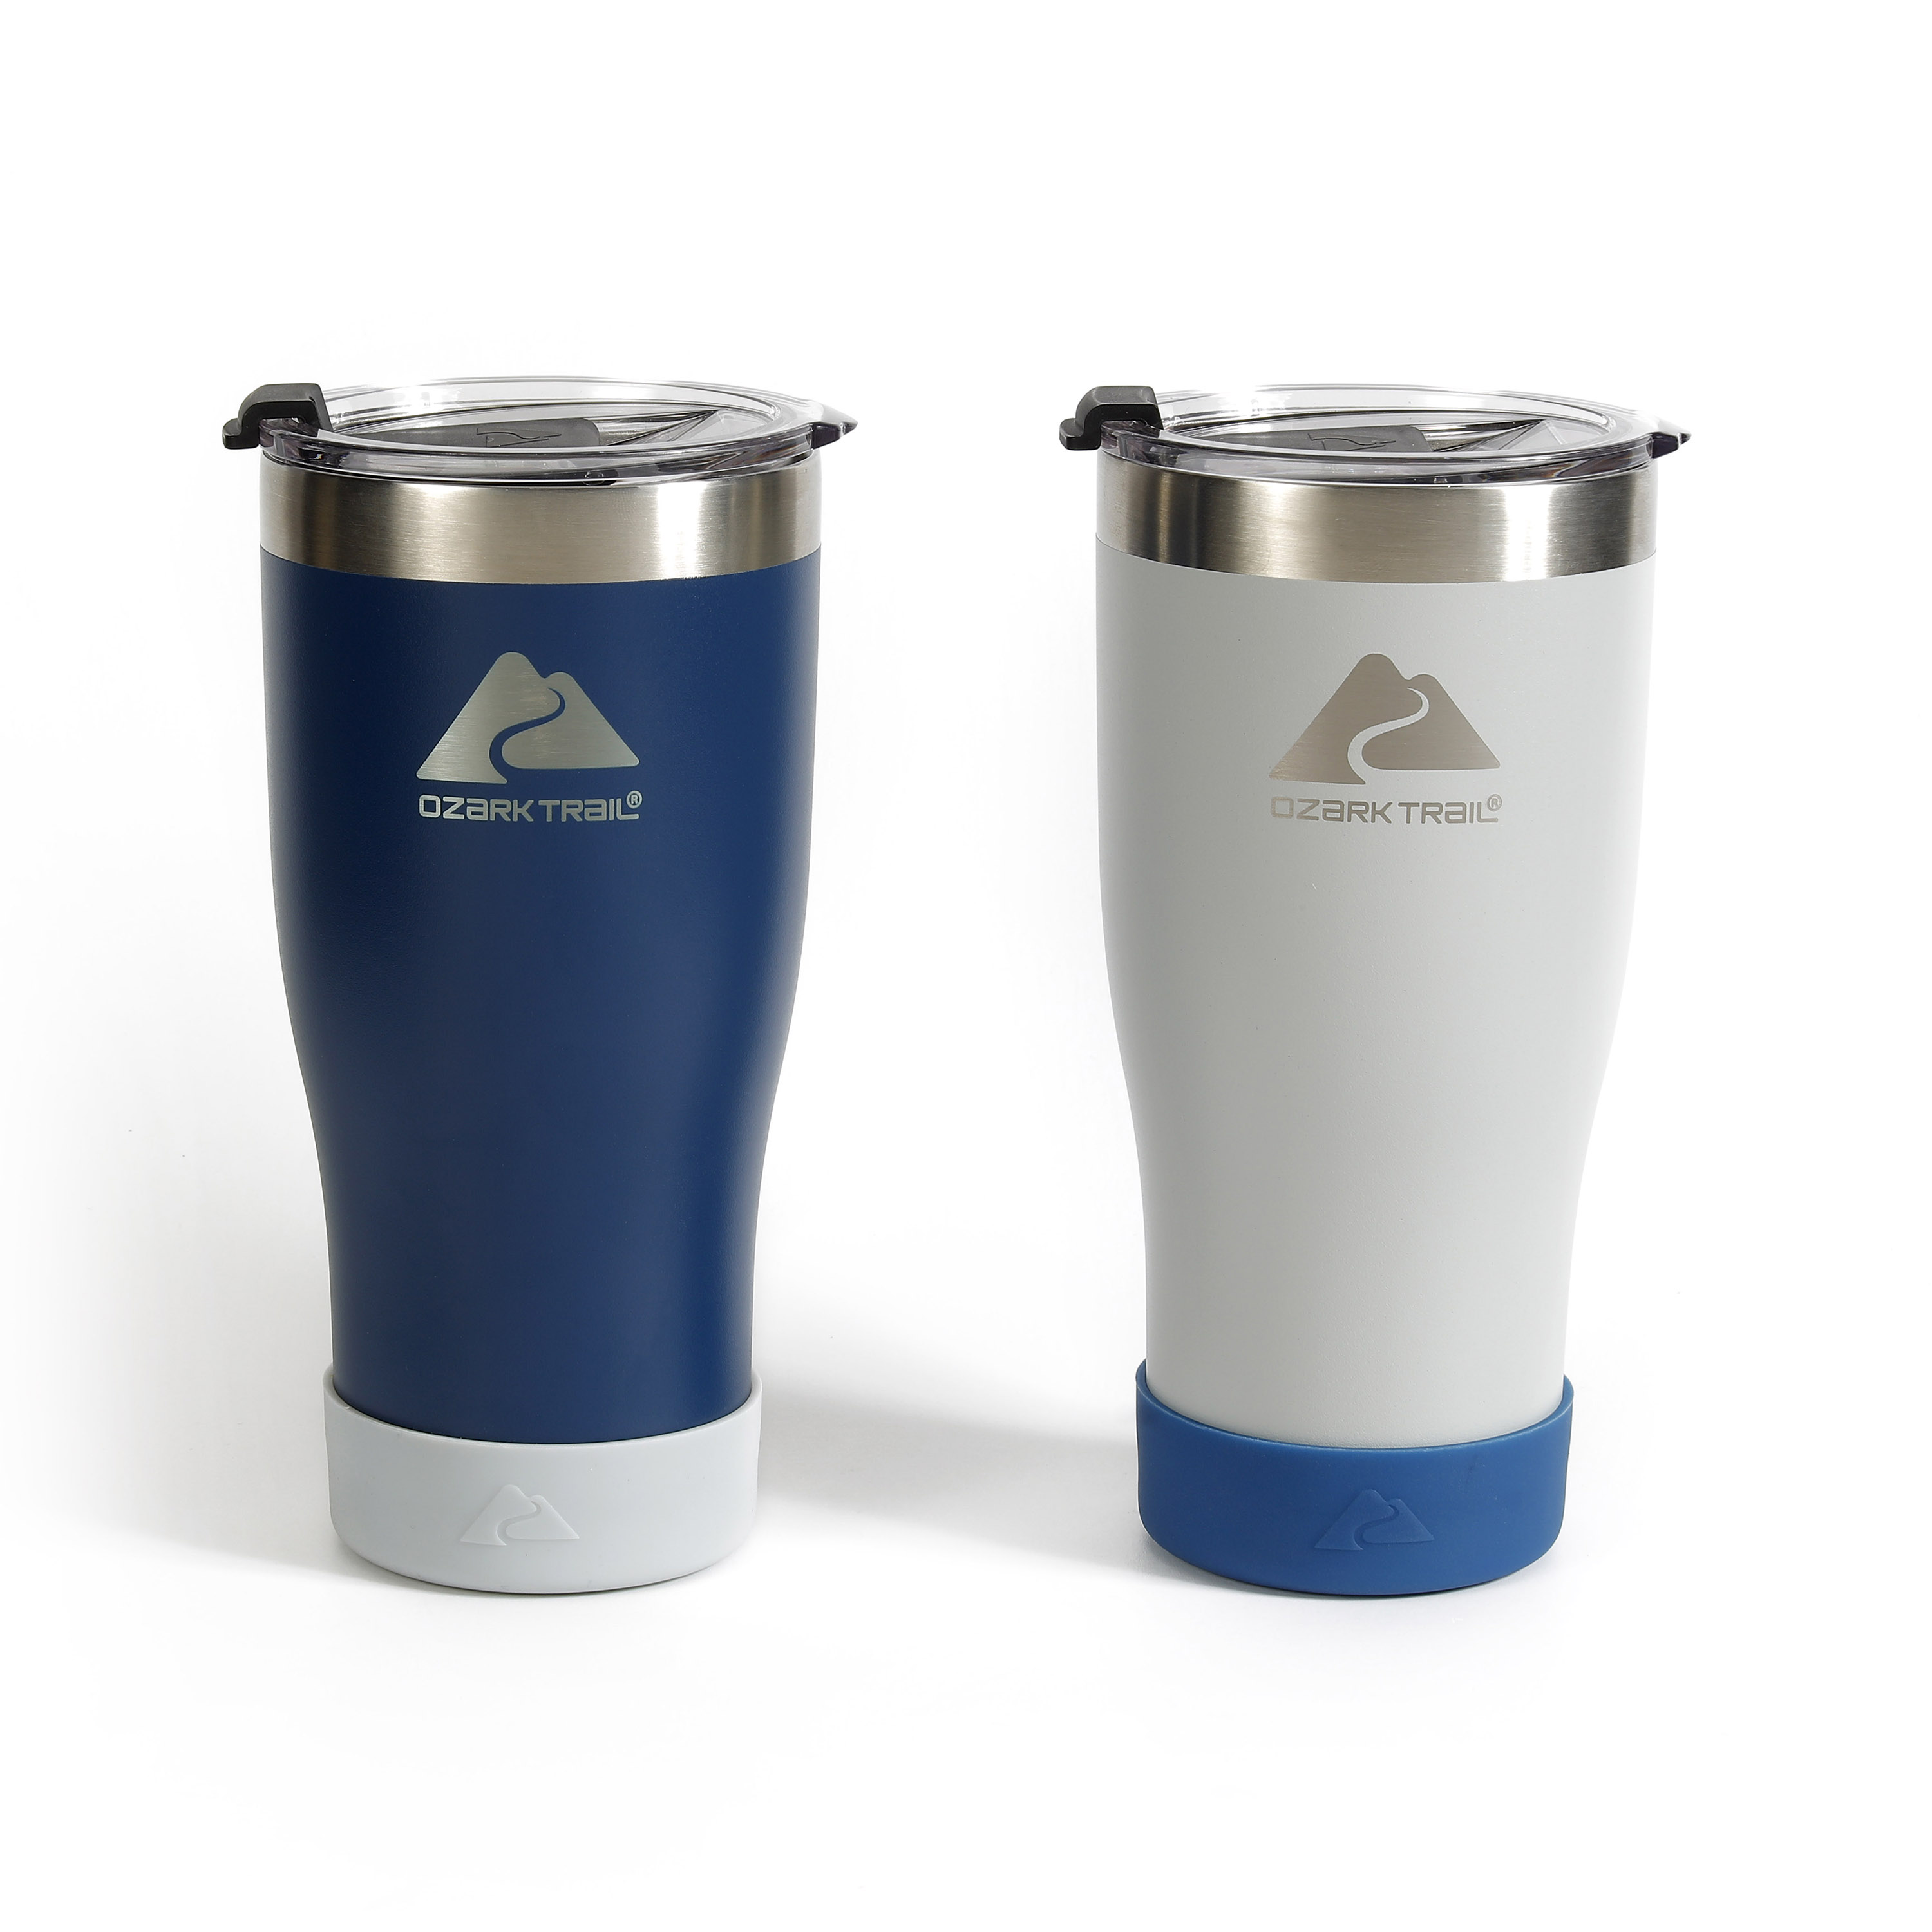 Ozark Trail 2 Pack Stainless Steel Vacuum Tumblers, 20oz, Navy and Silver - image 1 of 5